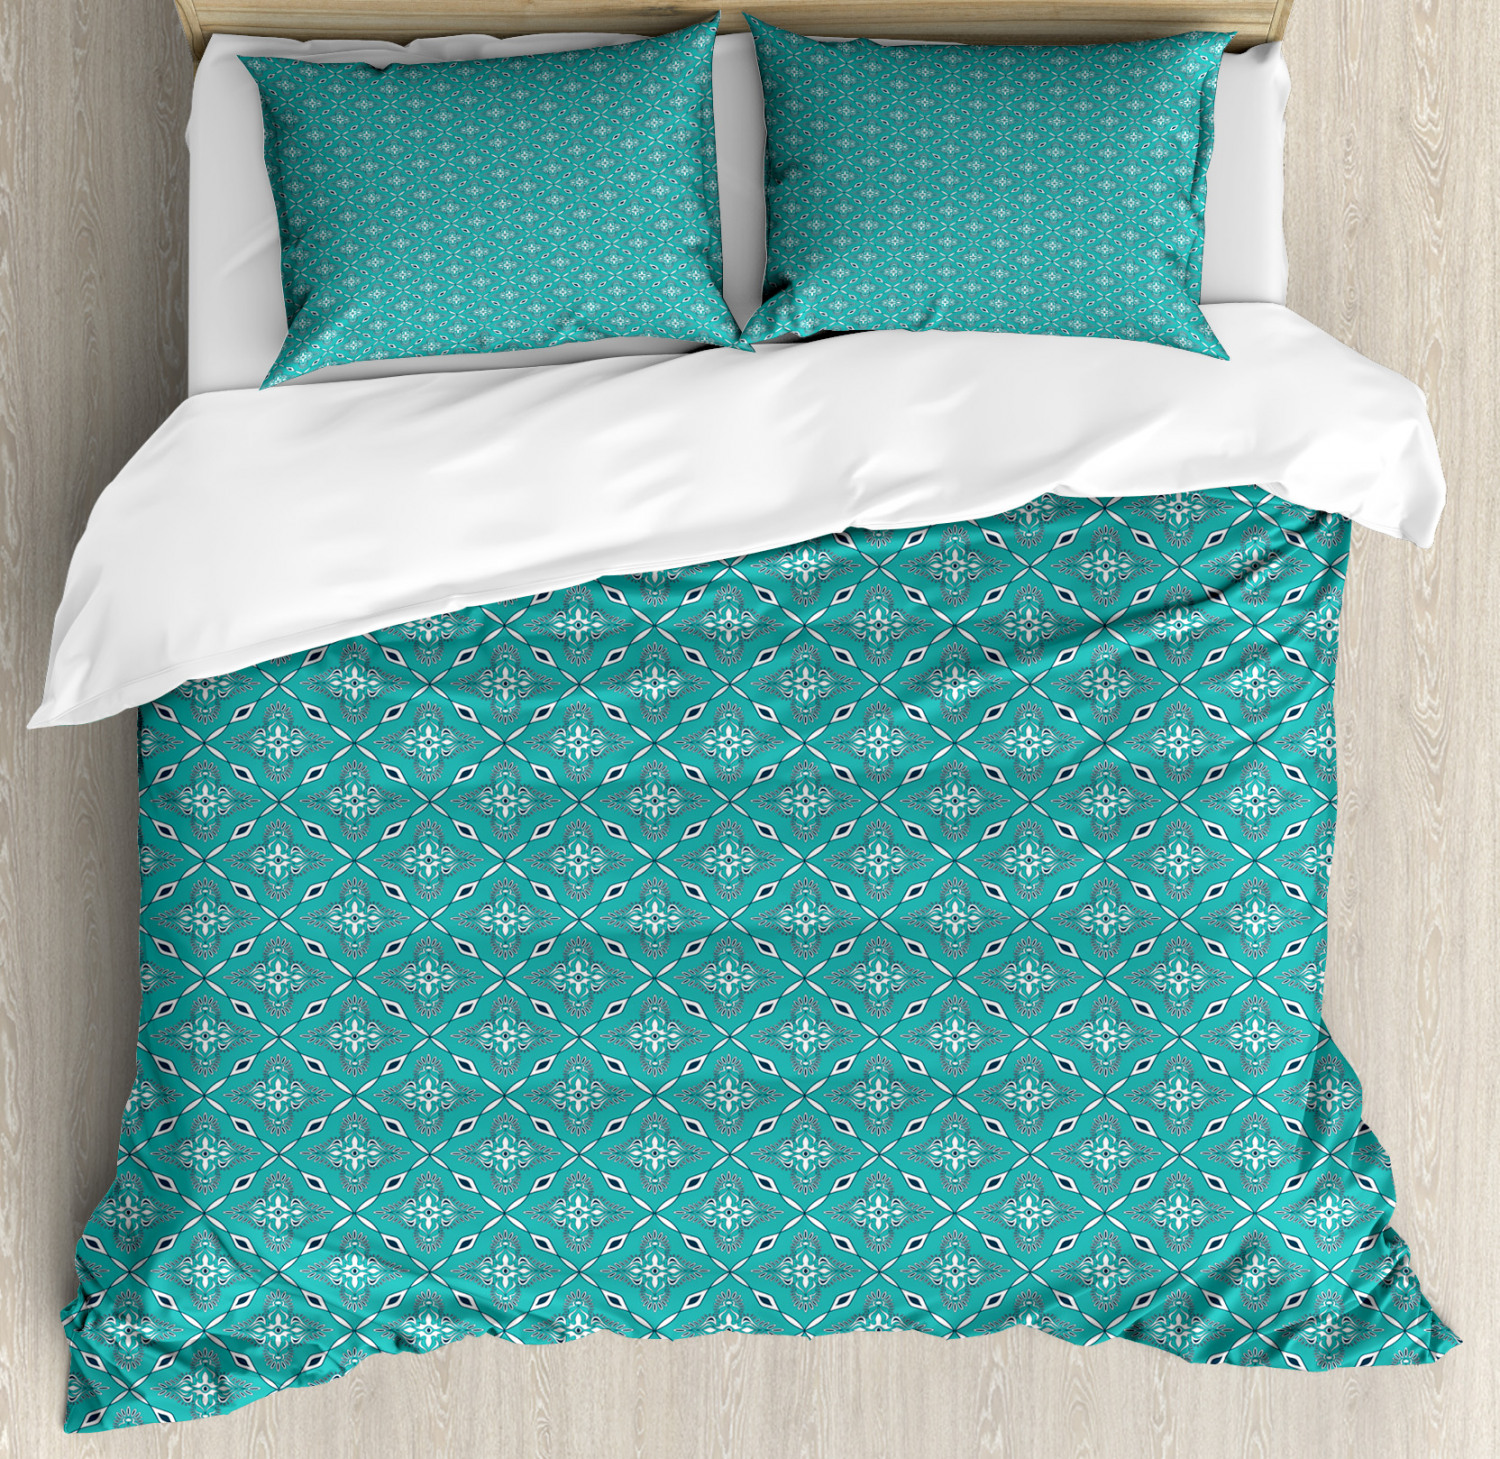 Turquoise Duvet Cover Set with Pillow Shams Inspirations Print | eBay